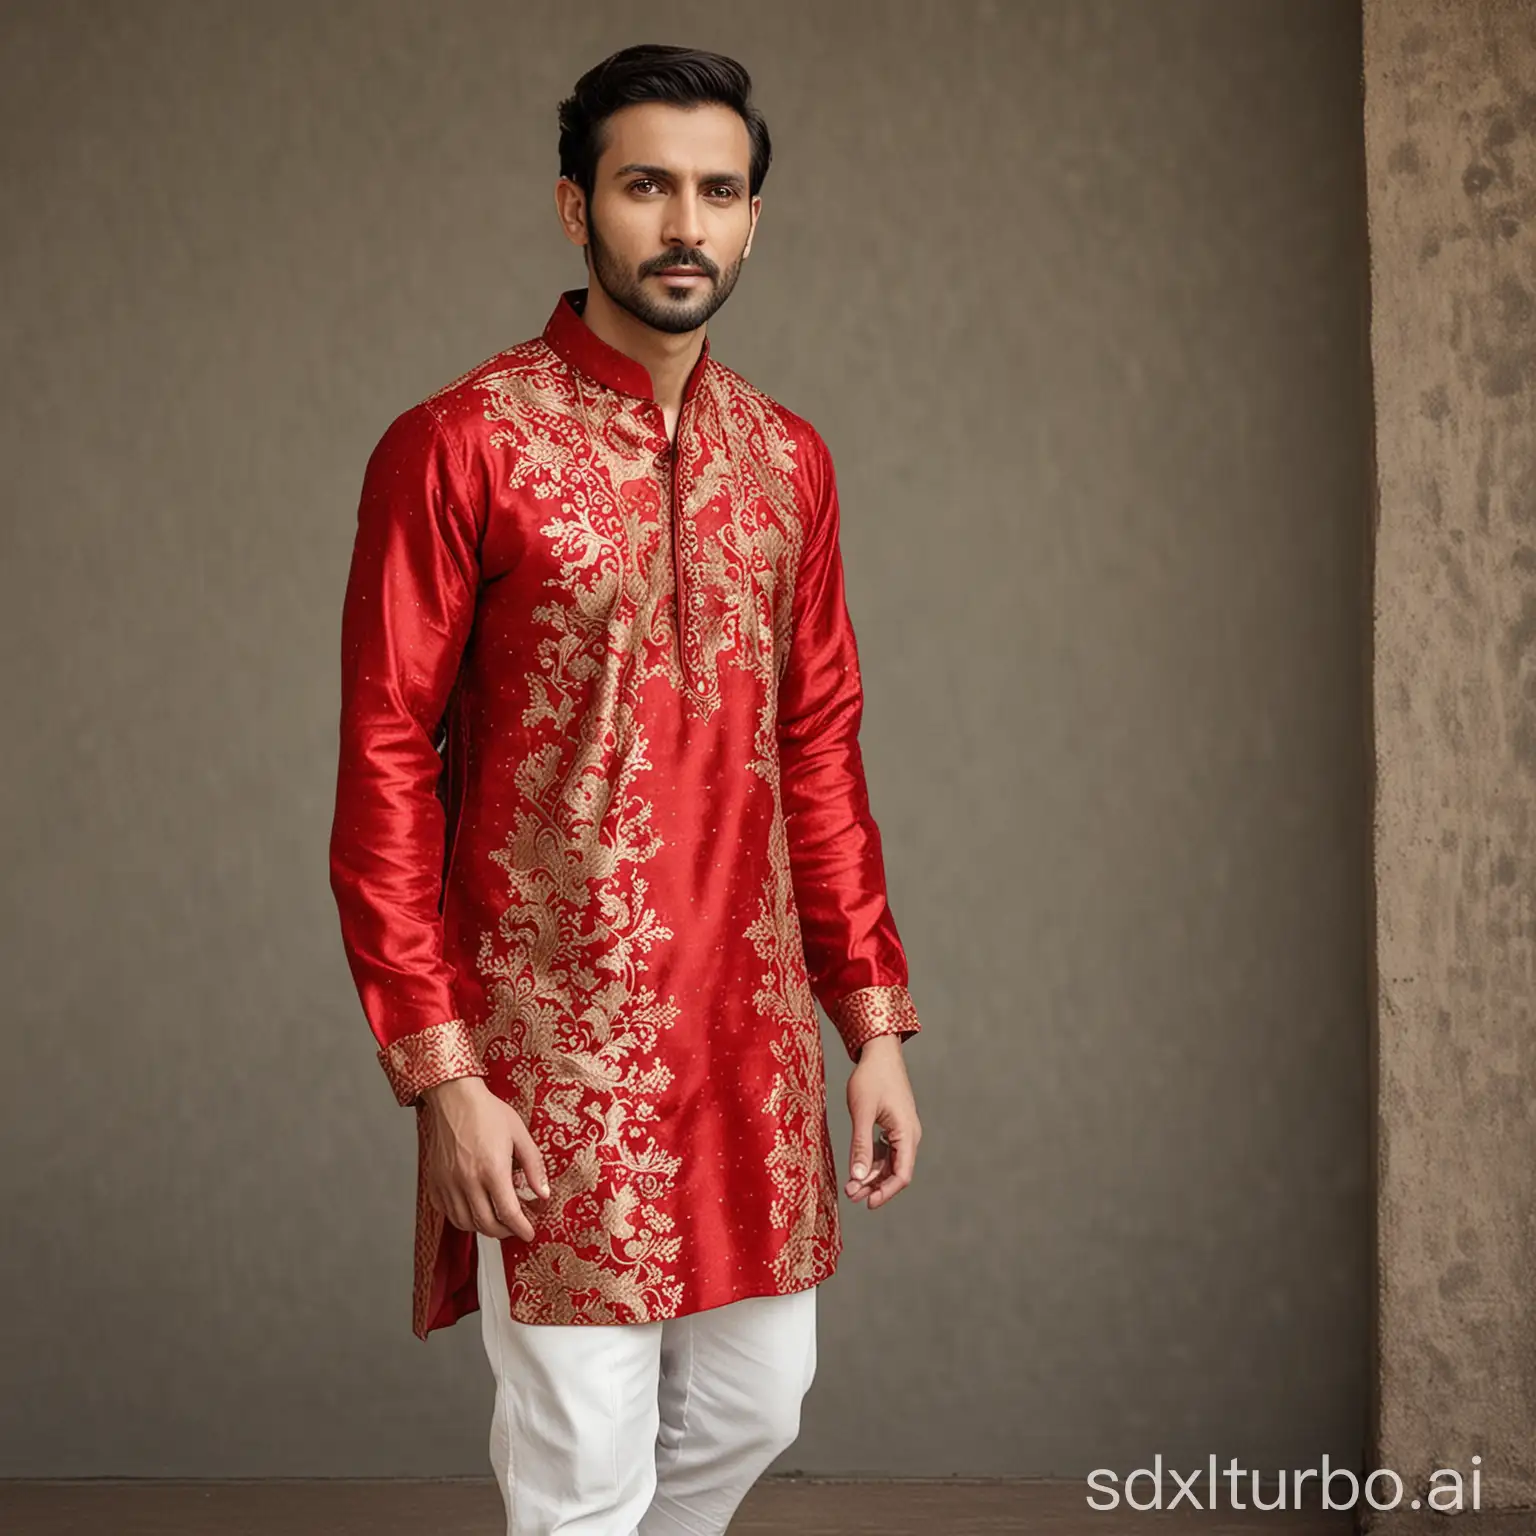 a man in a red shirt and white pants, brocade dress, wearing a kurta, ad image, sparkle